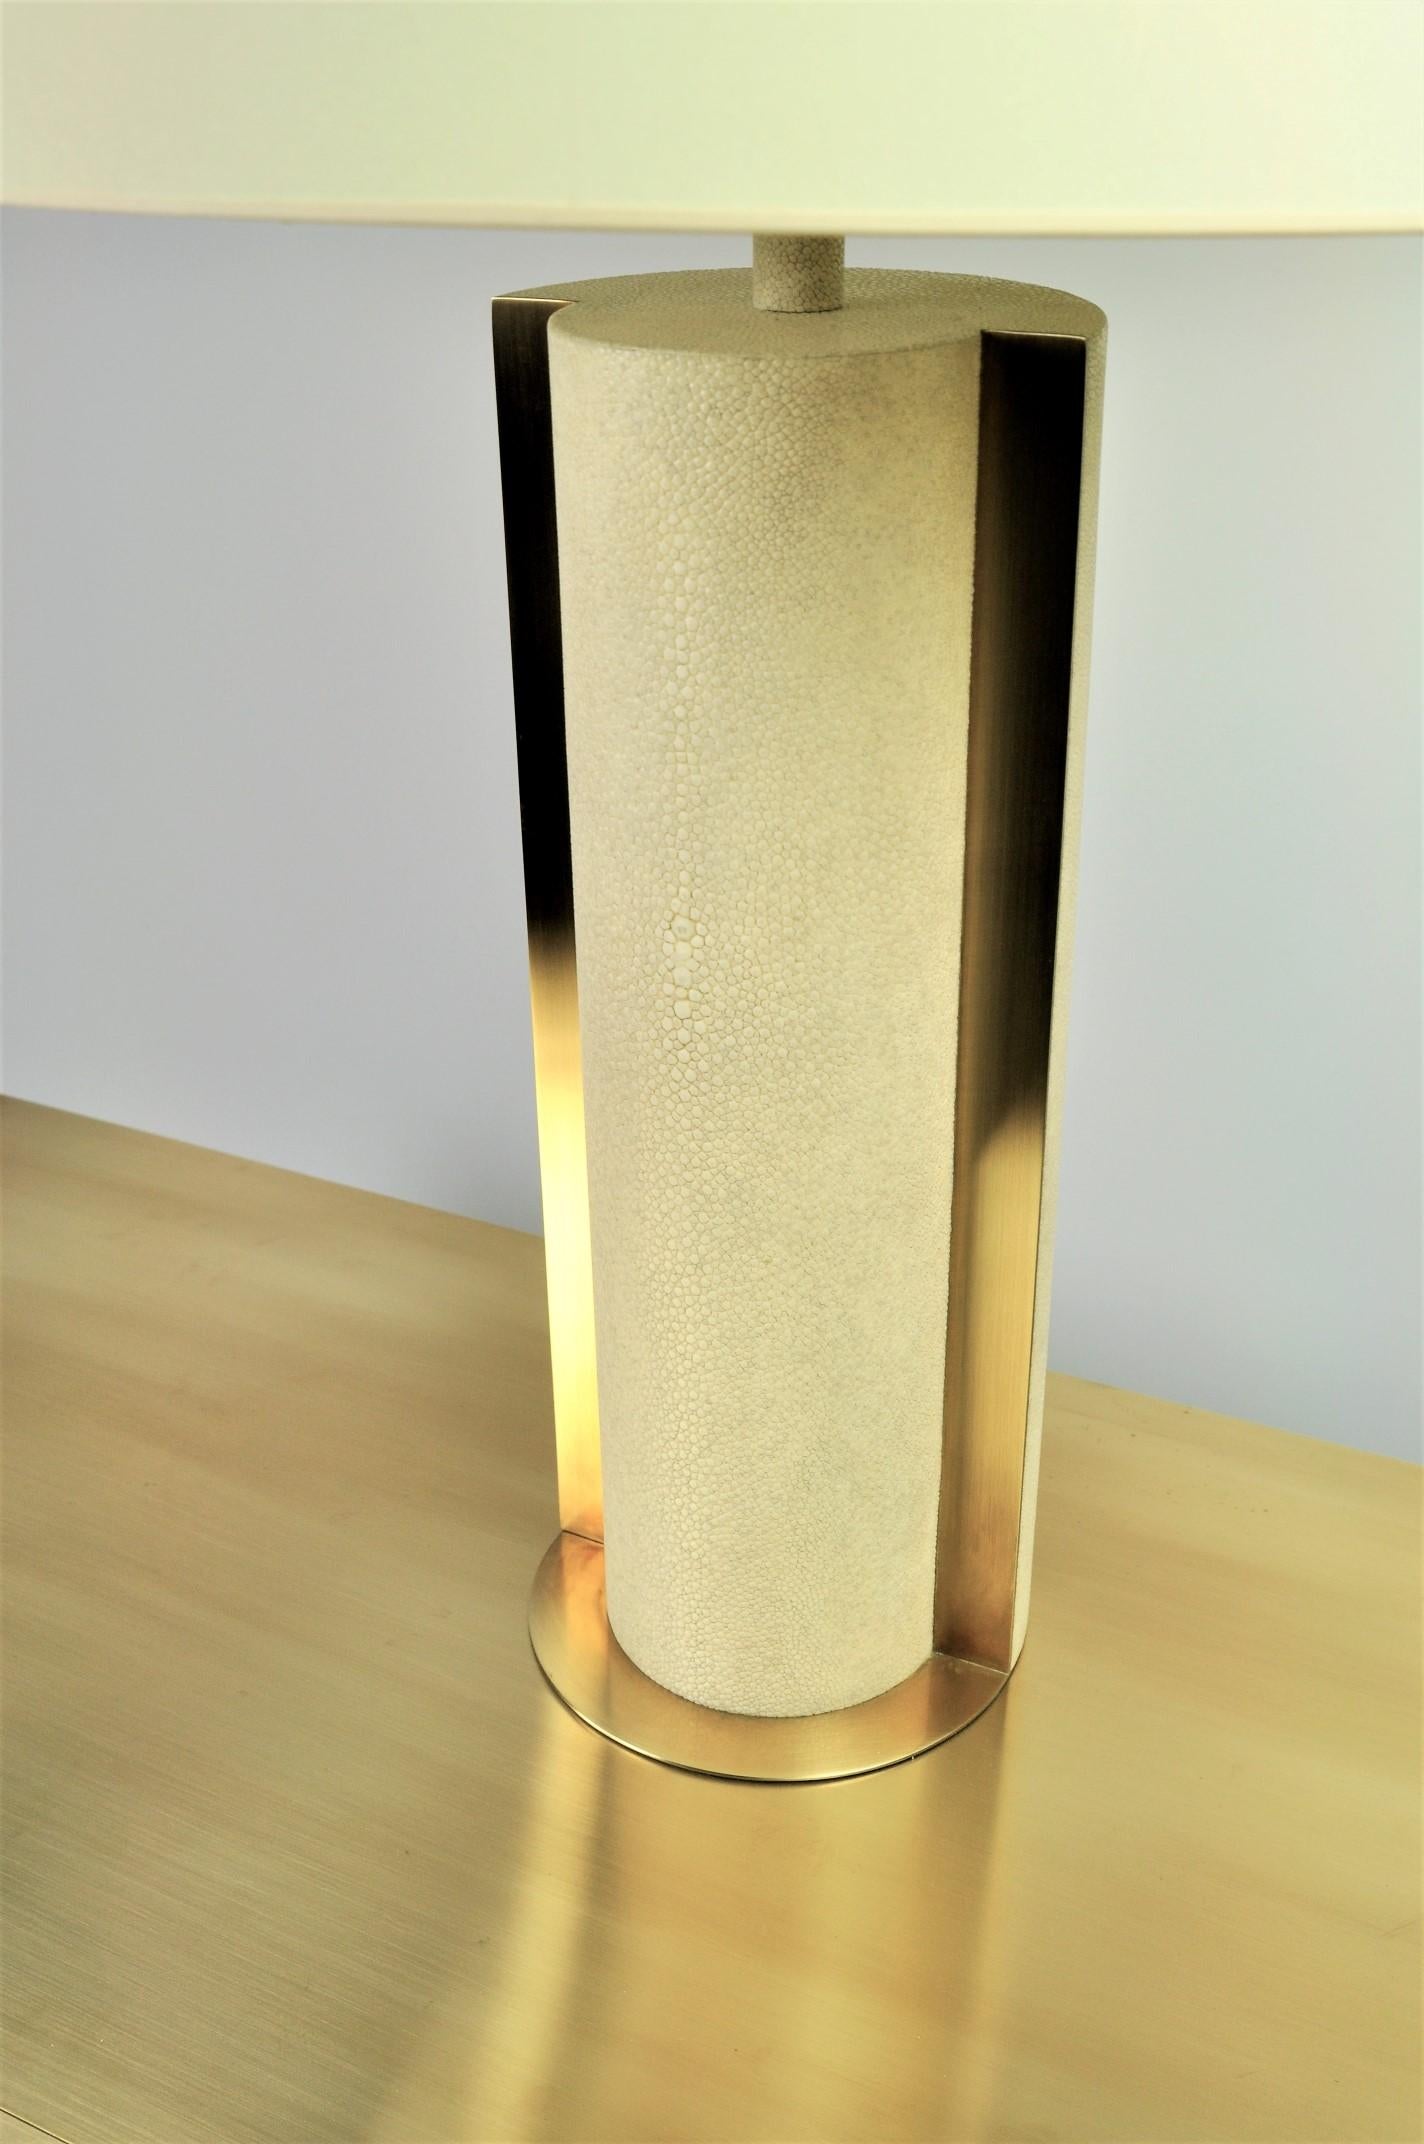 The table lamp ECLIPSE by Ginger Brown is made of shagreen and brushed brass trims.
The style is timeless with a modern touch thanks to its cylindrical shape. A must have on a large console table or a dresser.

This lamp can be delivered with EU,